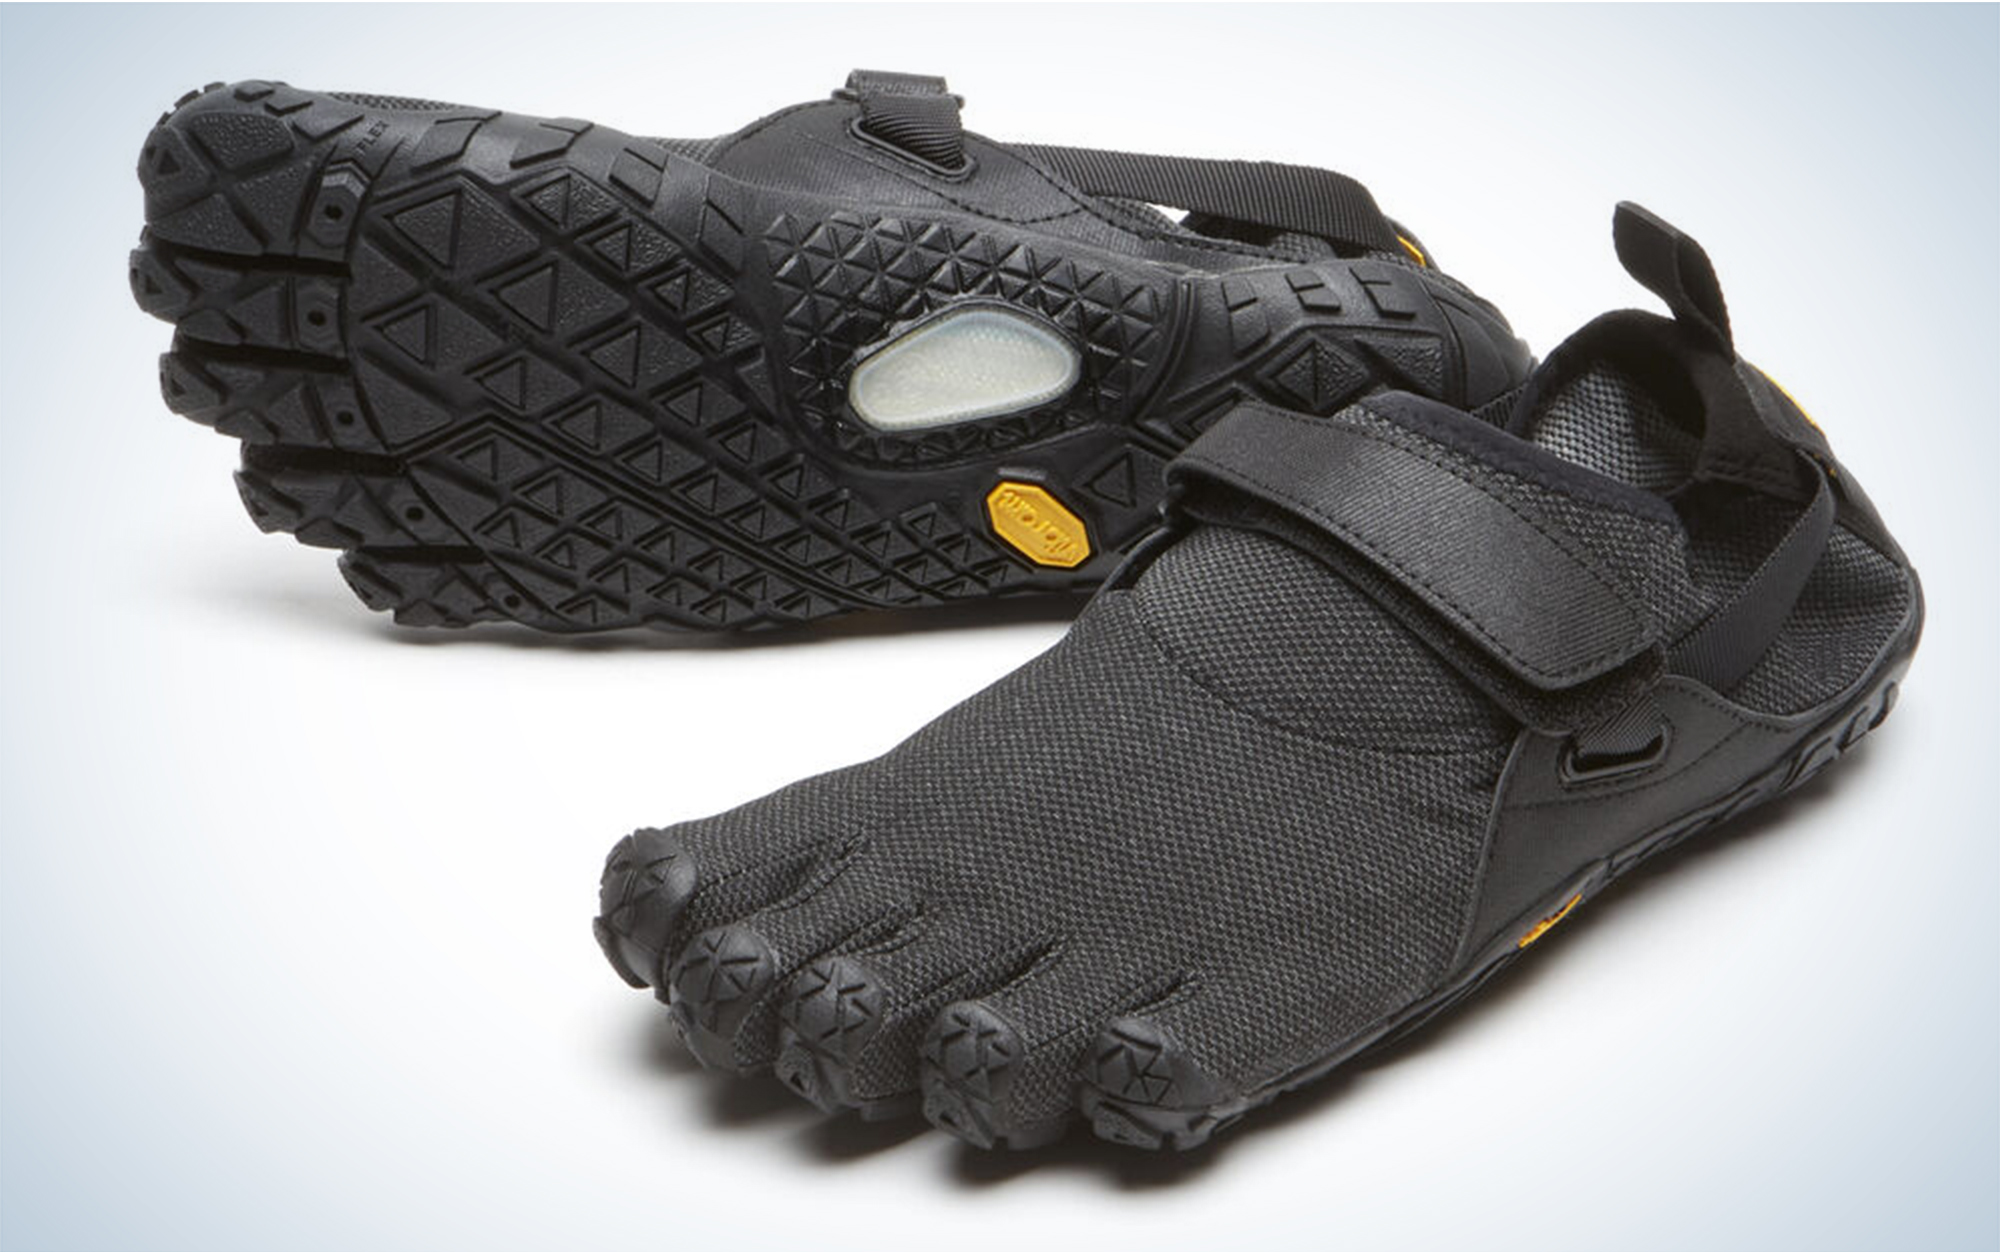 The Vibram Spyridon Evo are the minimalist trail runners with the best ground feel.